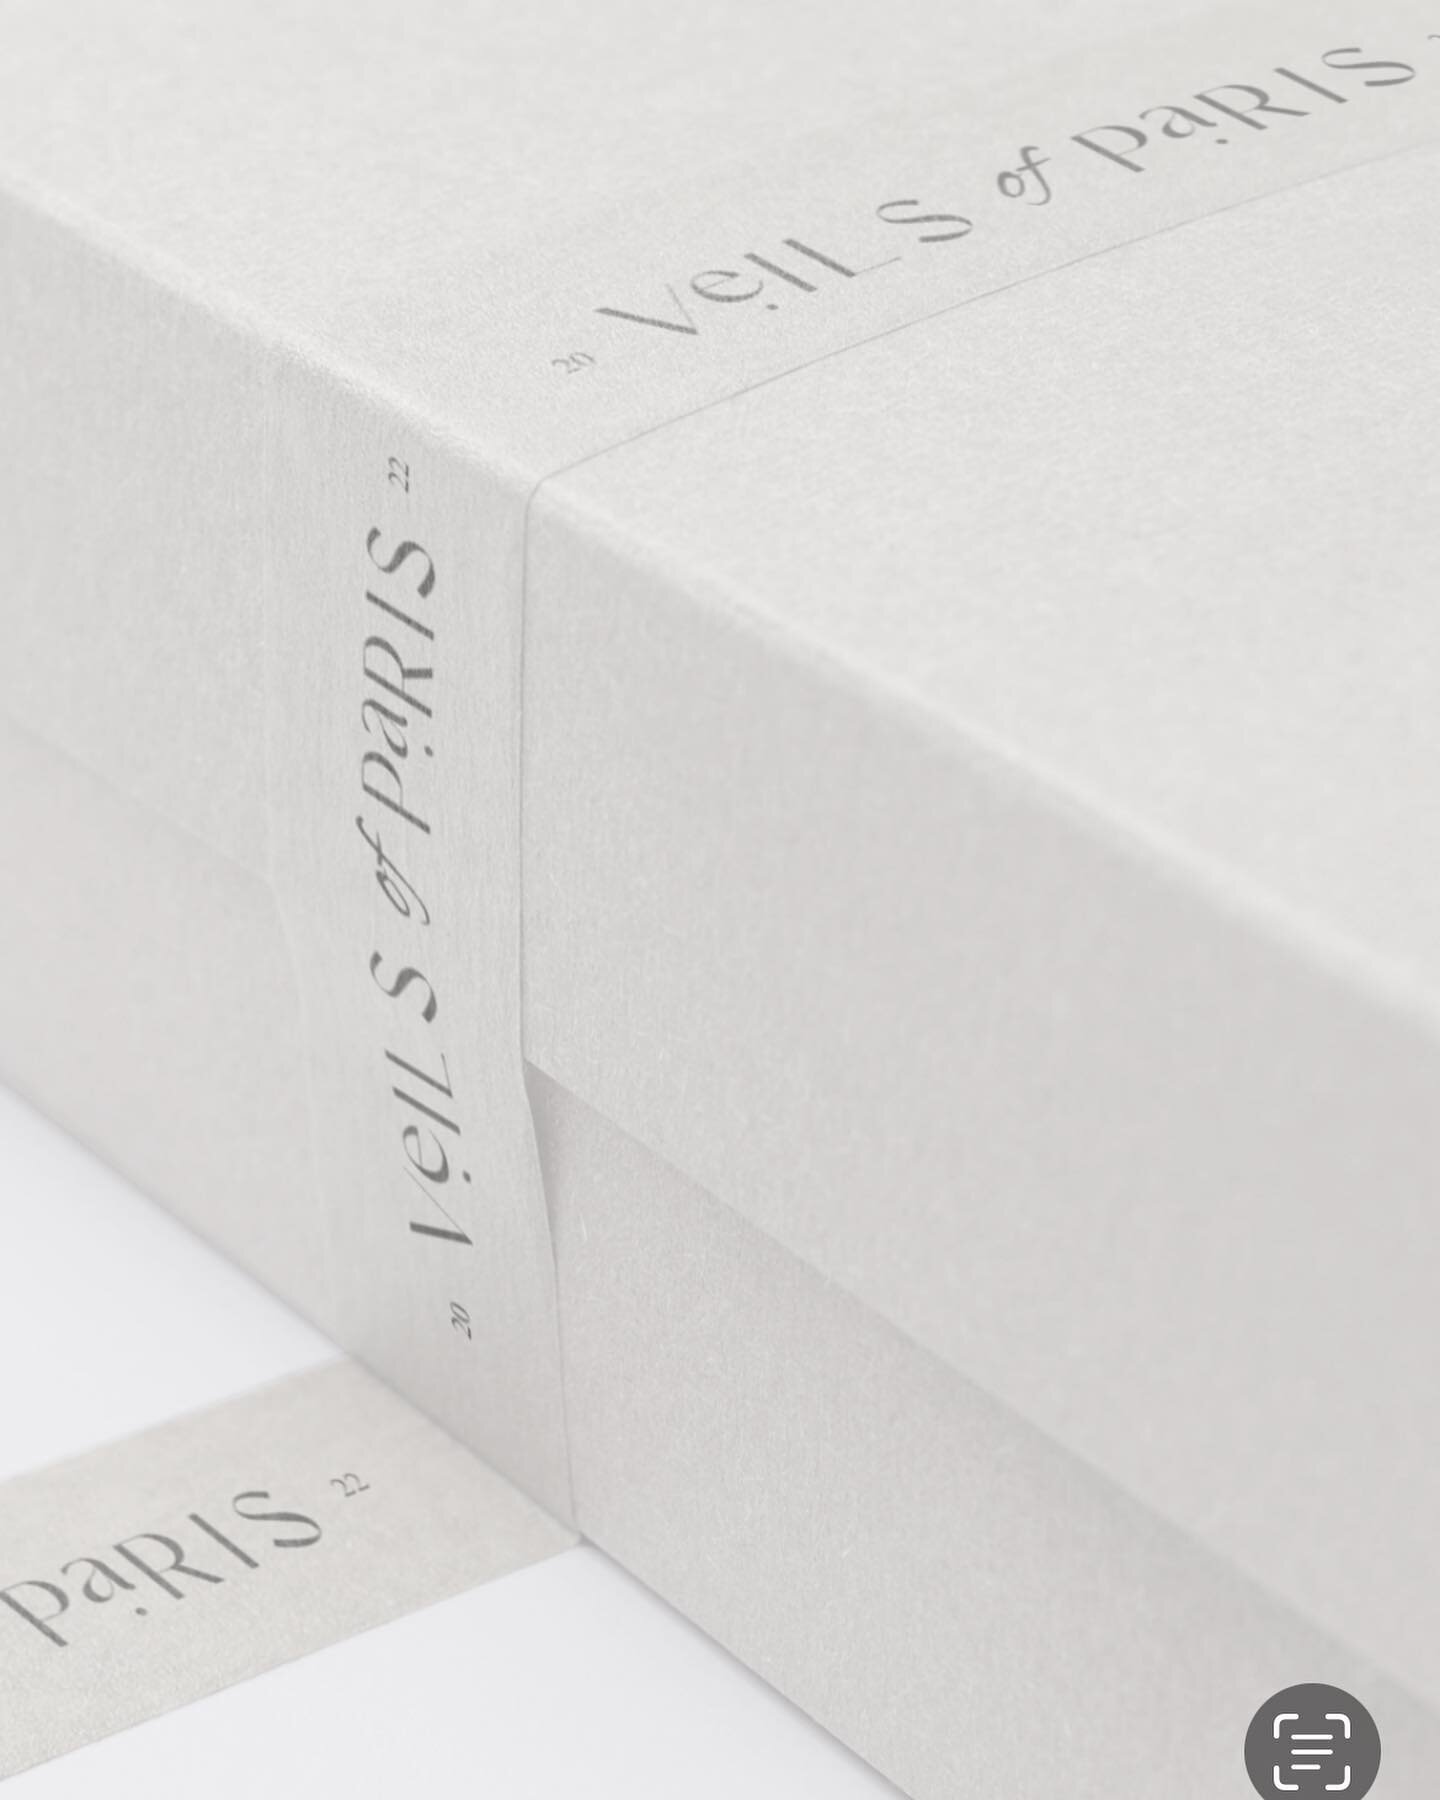 We loved designing this beautiful brand identity and packaging for Veils of Paris. 

We added a touch of luxury through the use of textures. Soft touch finish to postcard inserts, logo patterned velvet packaging tape, and an elegant press seal detail